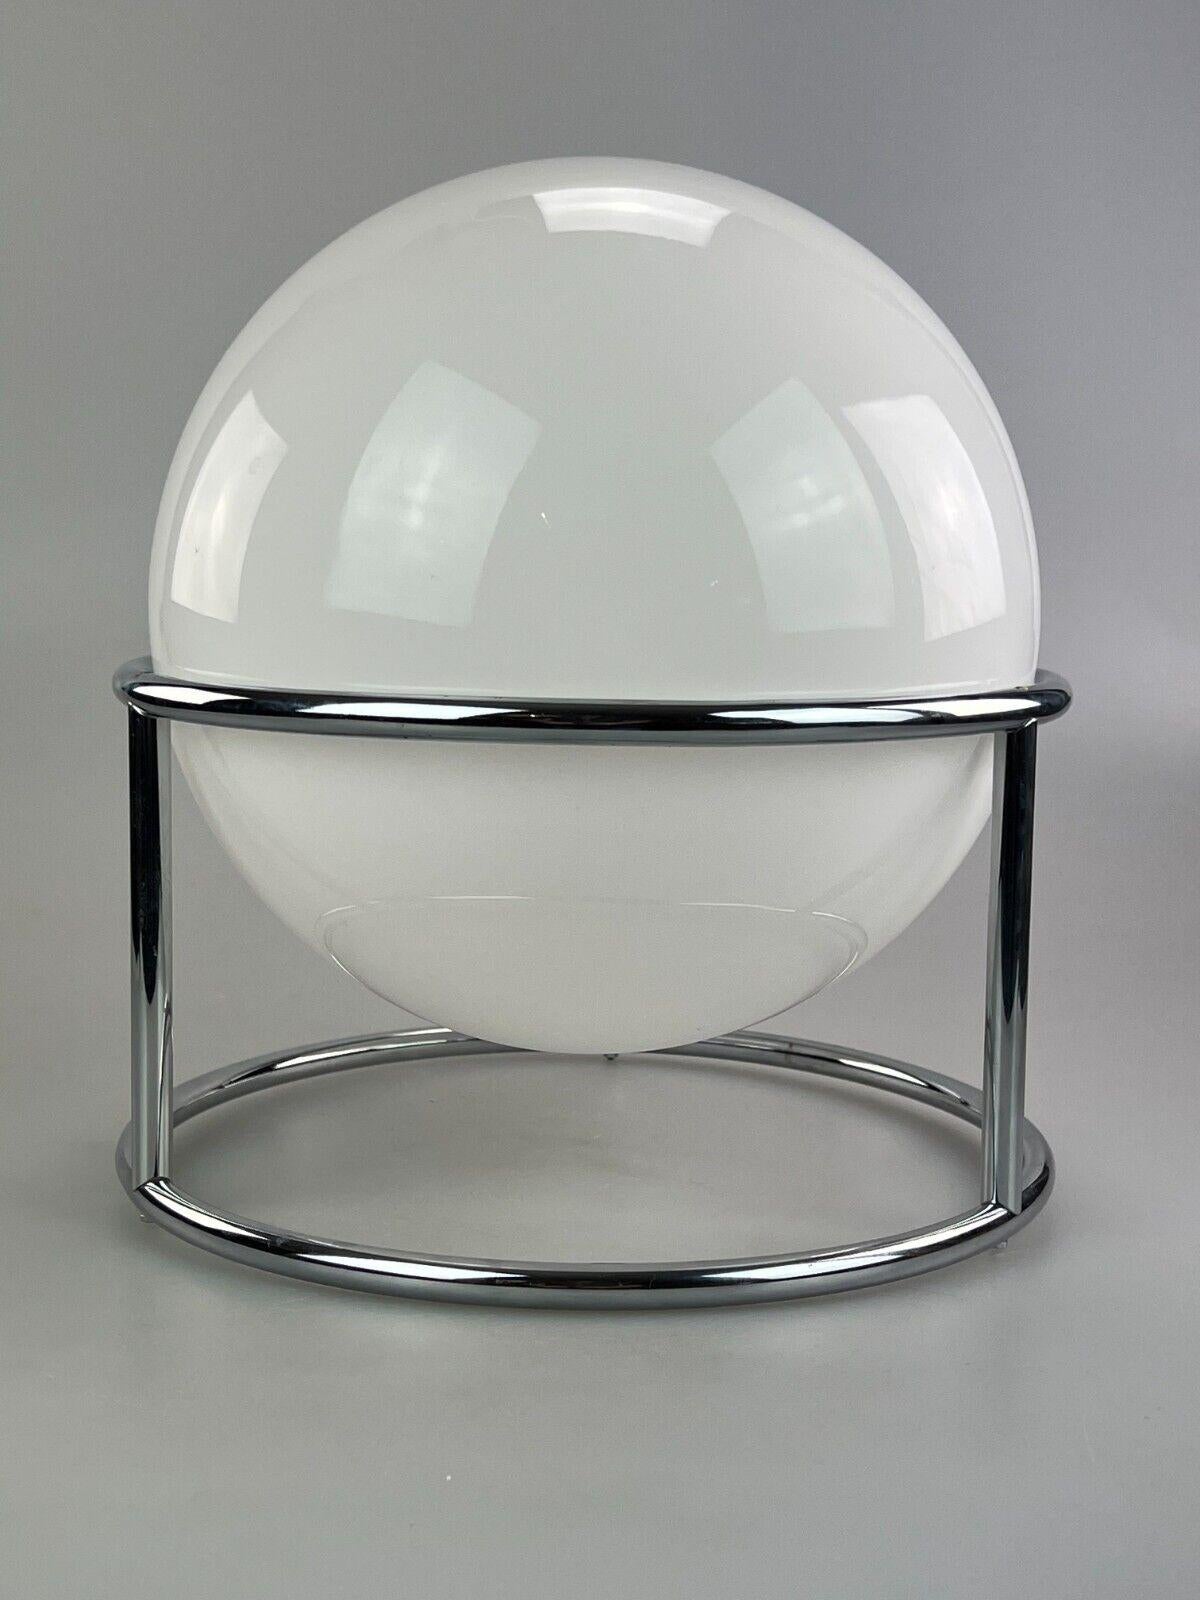 60s 70s Ball Lamp Lamp Light Table Lamp Space Age Design Glass Metal 1